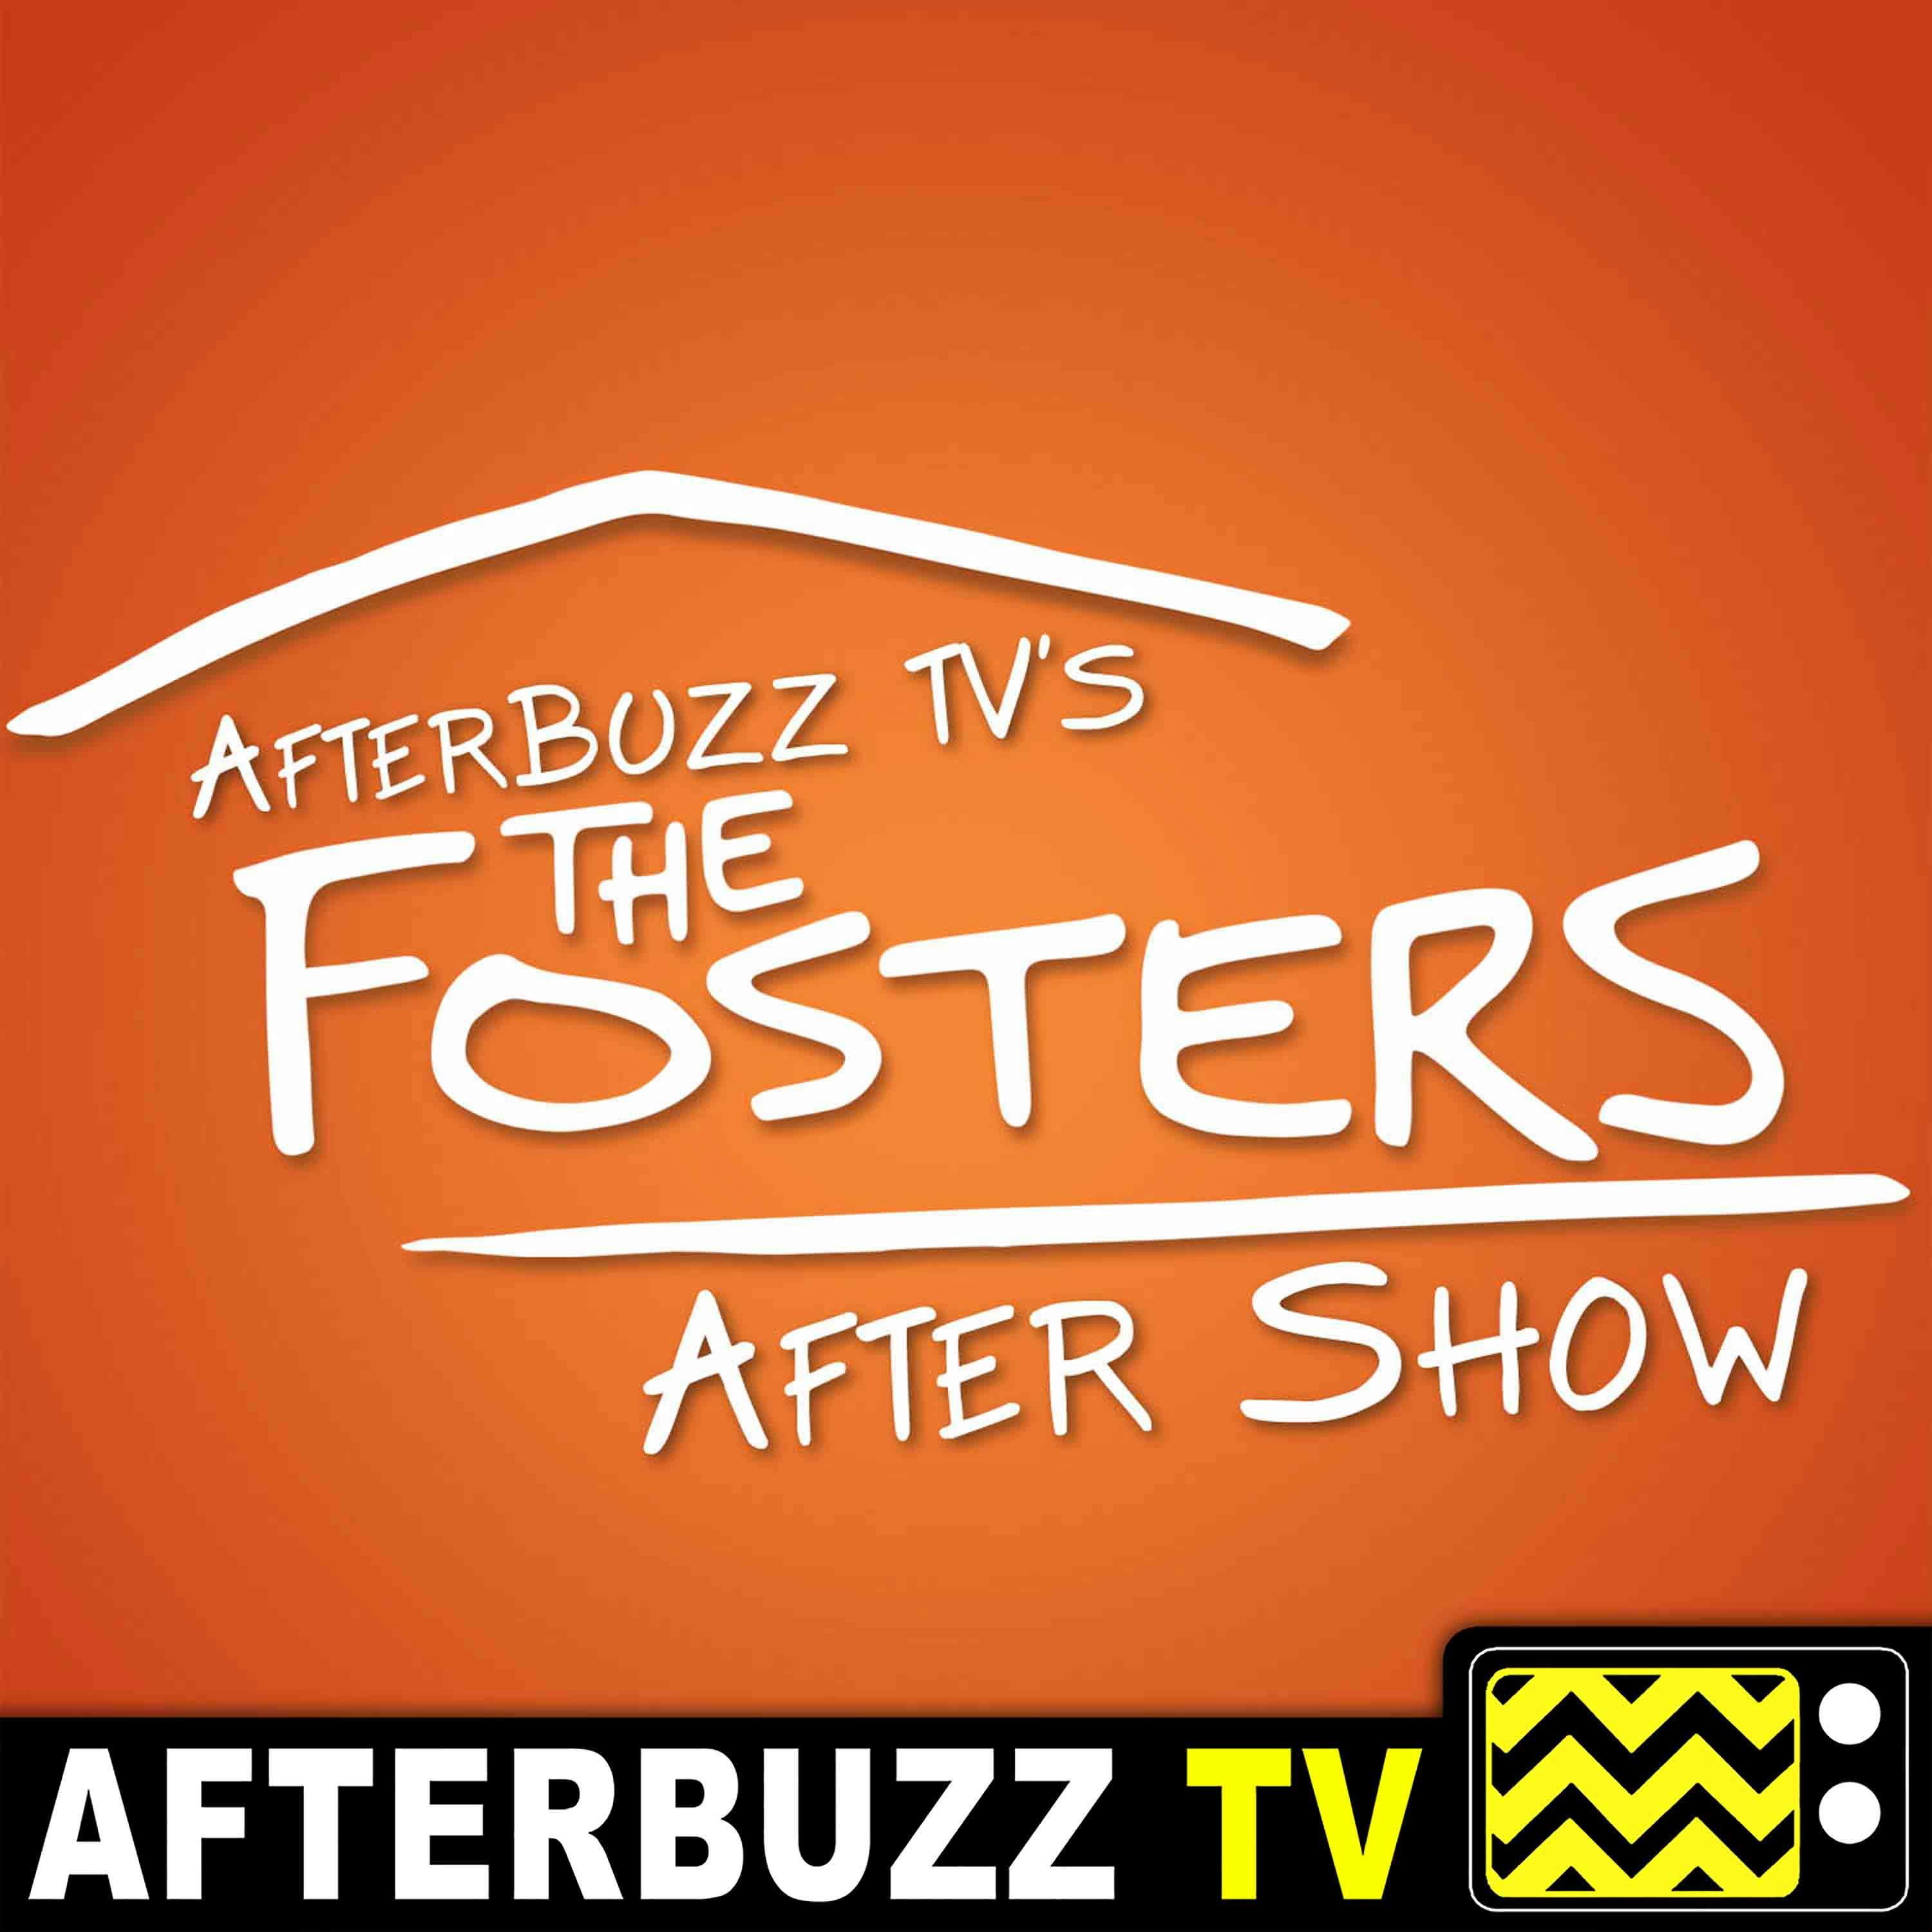 The Fosters S:5 | Nandy Martin Guests on Third Wheels E:13 | AfterBuzz TV AfterShow